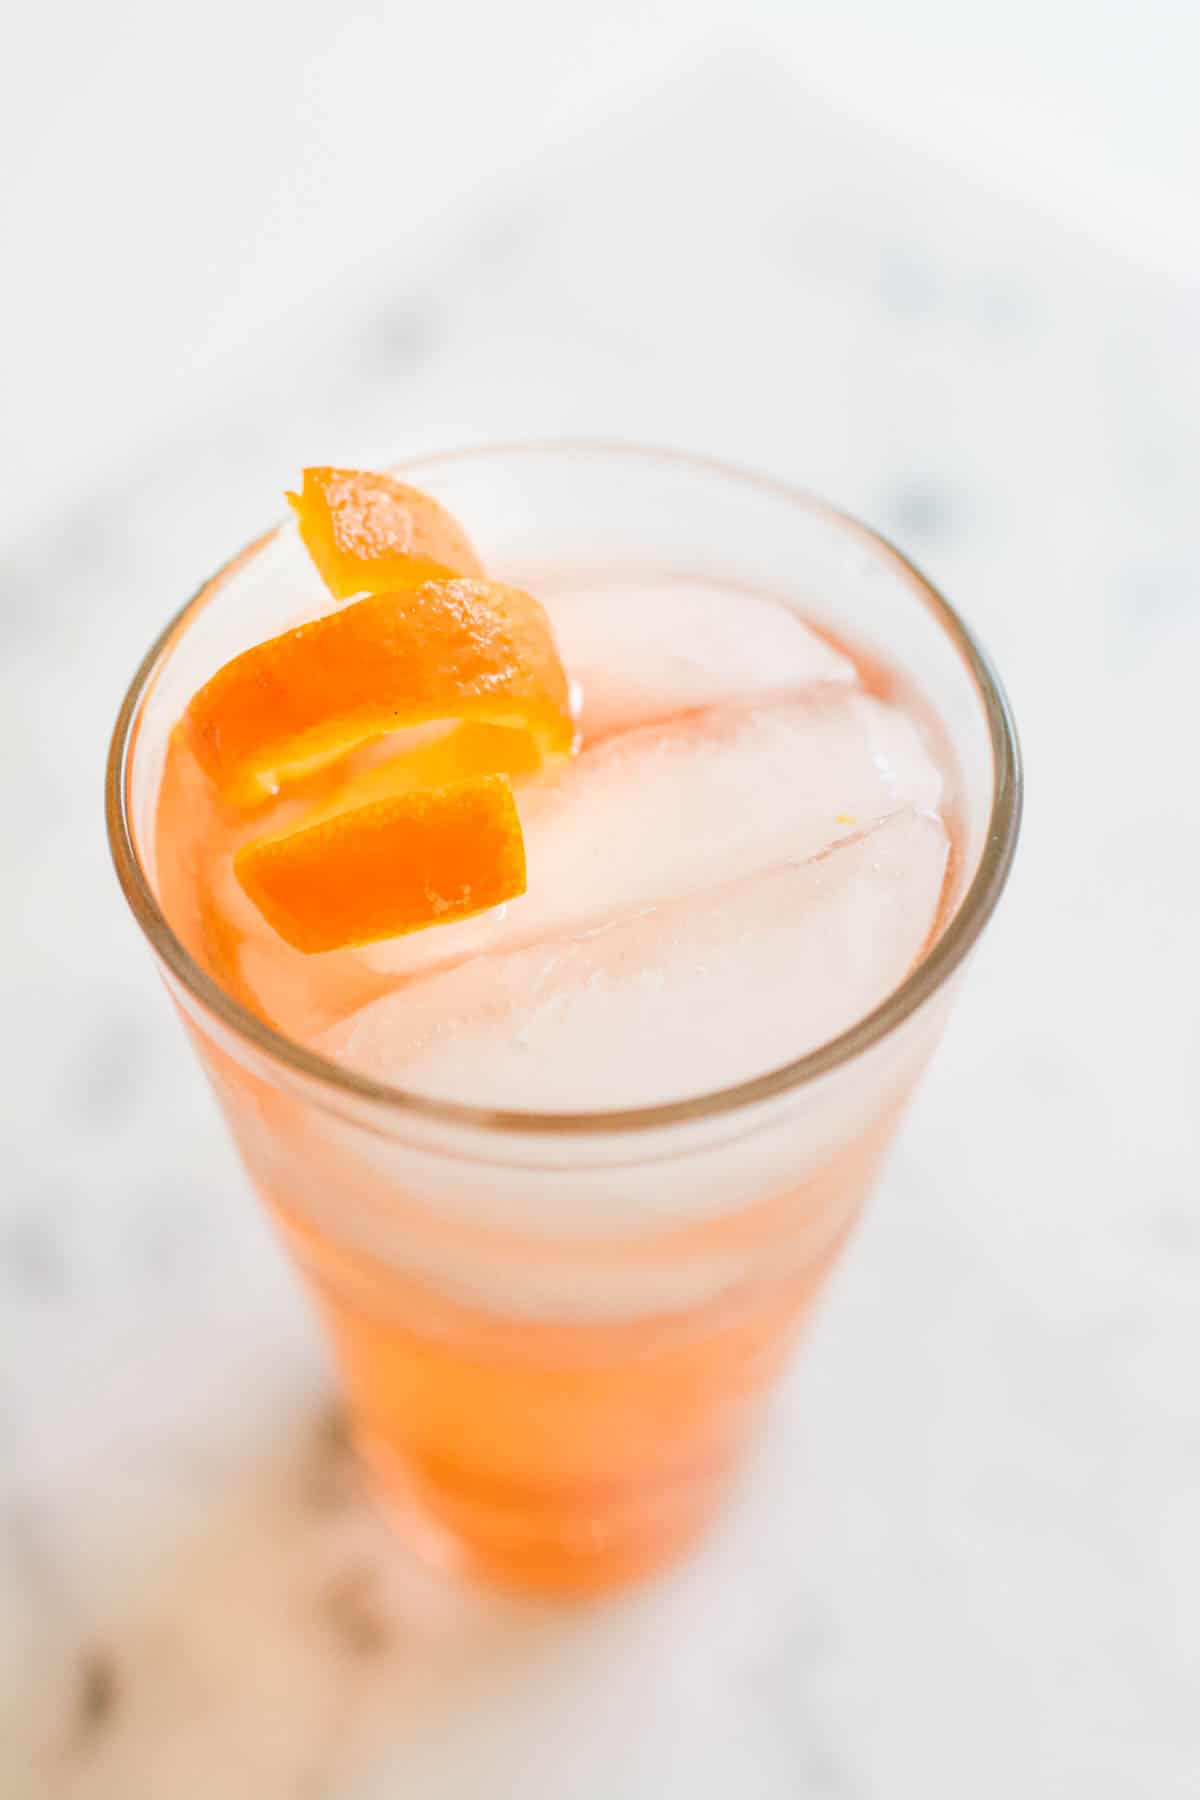 A cocktail with a citrus spiral garnish on top.